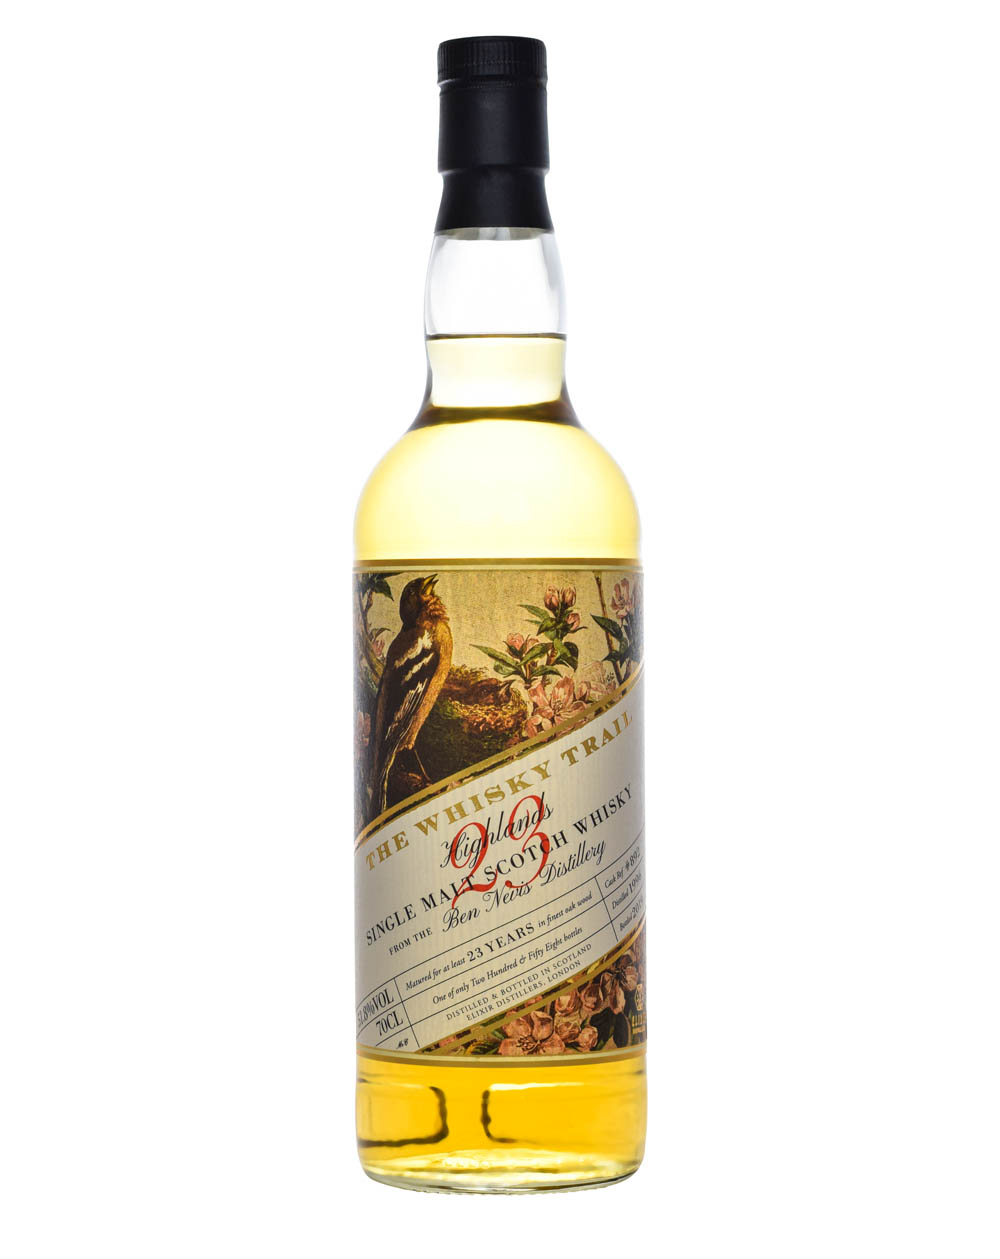 Ben Nevis 23 Years Old 1996 The Whisky Trail Musthave Malts MHM Musthave Malts MHM